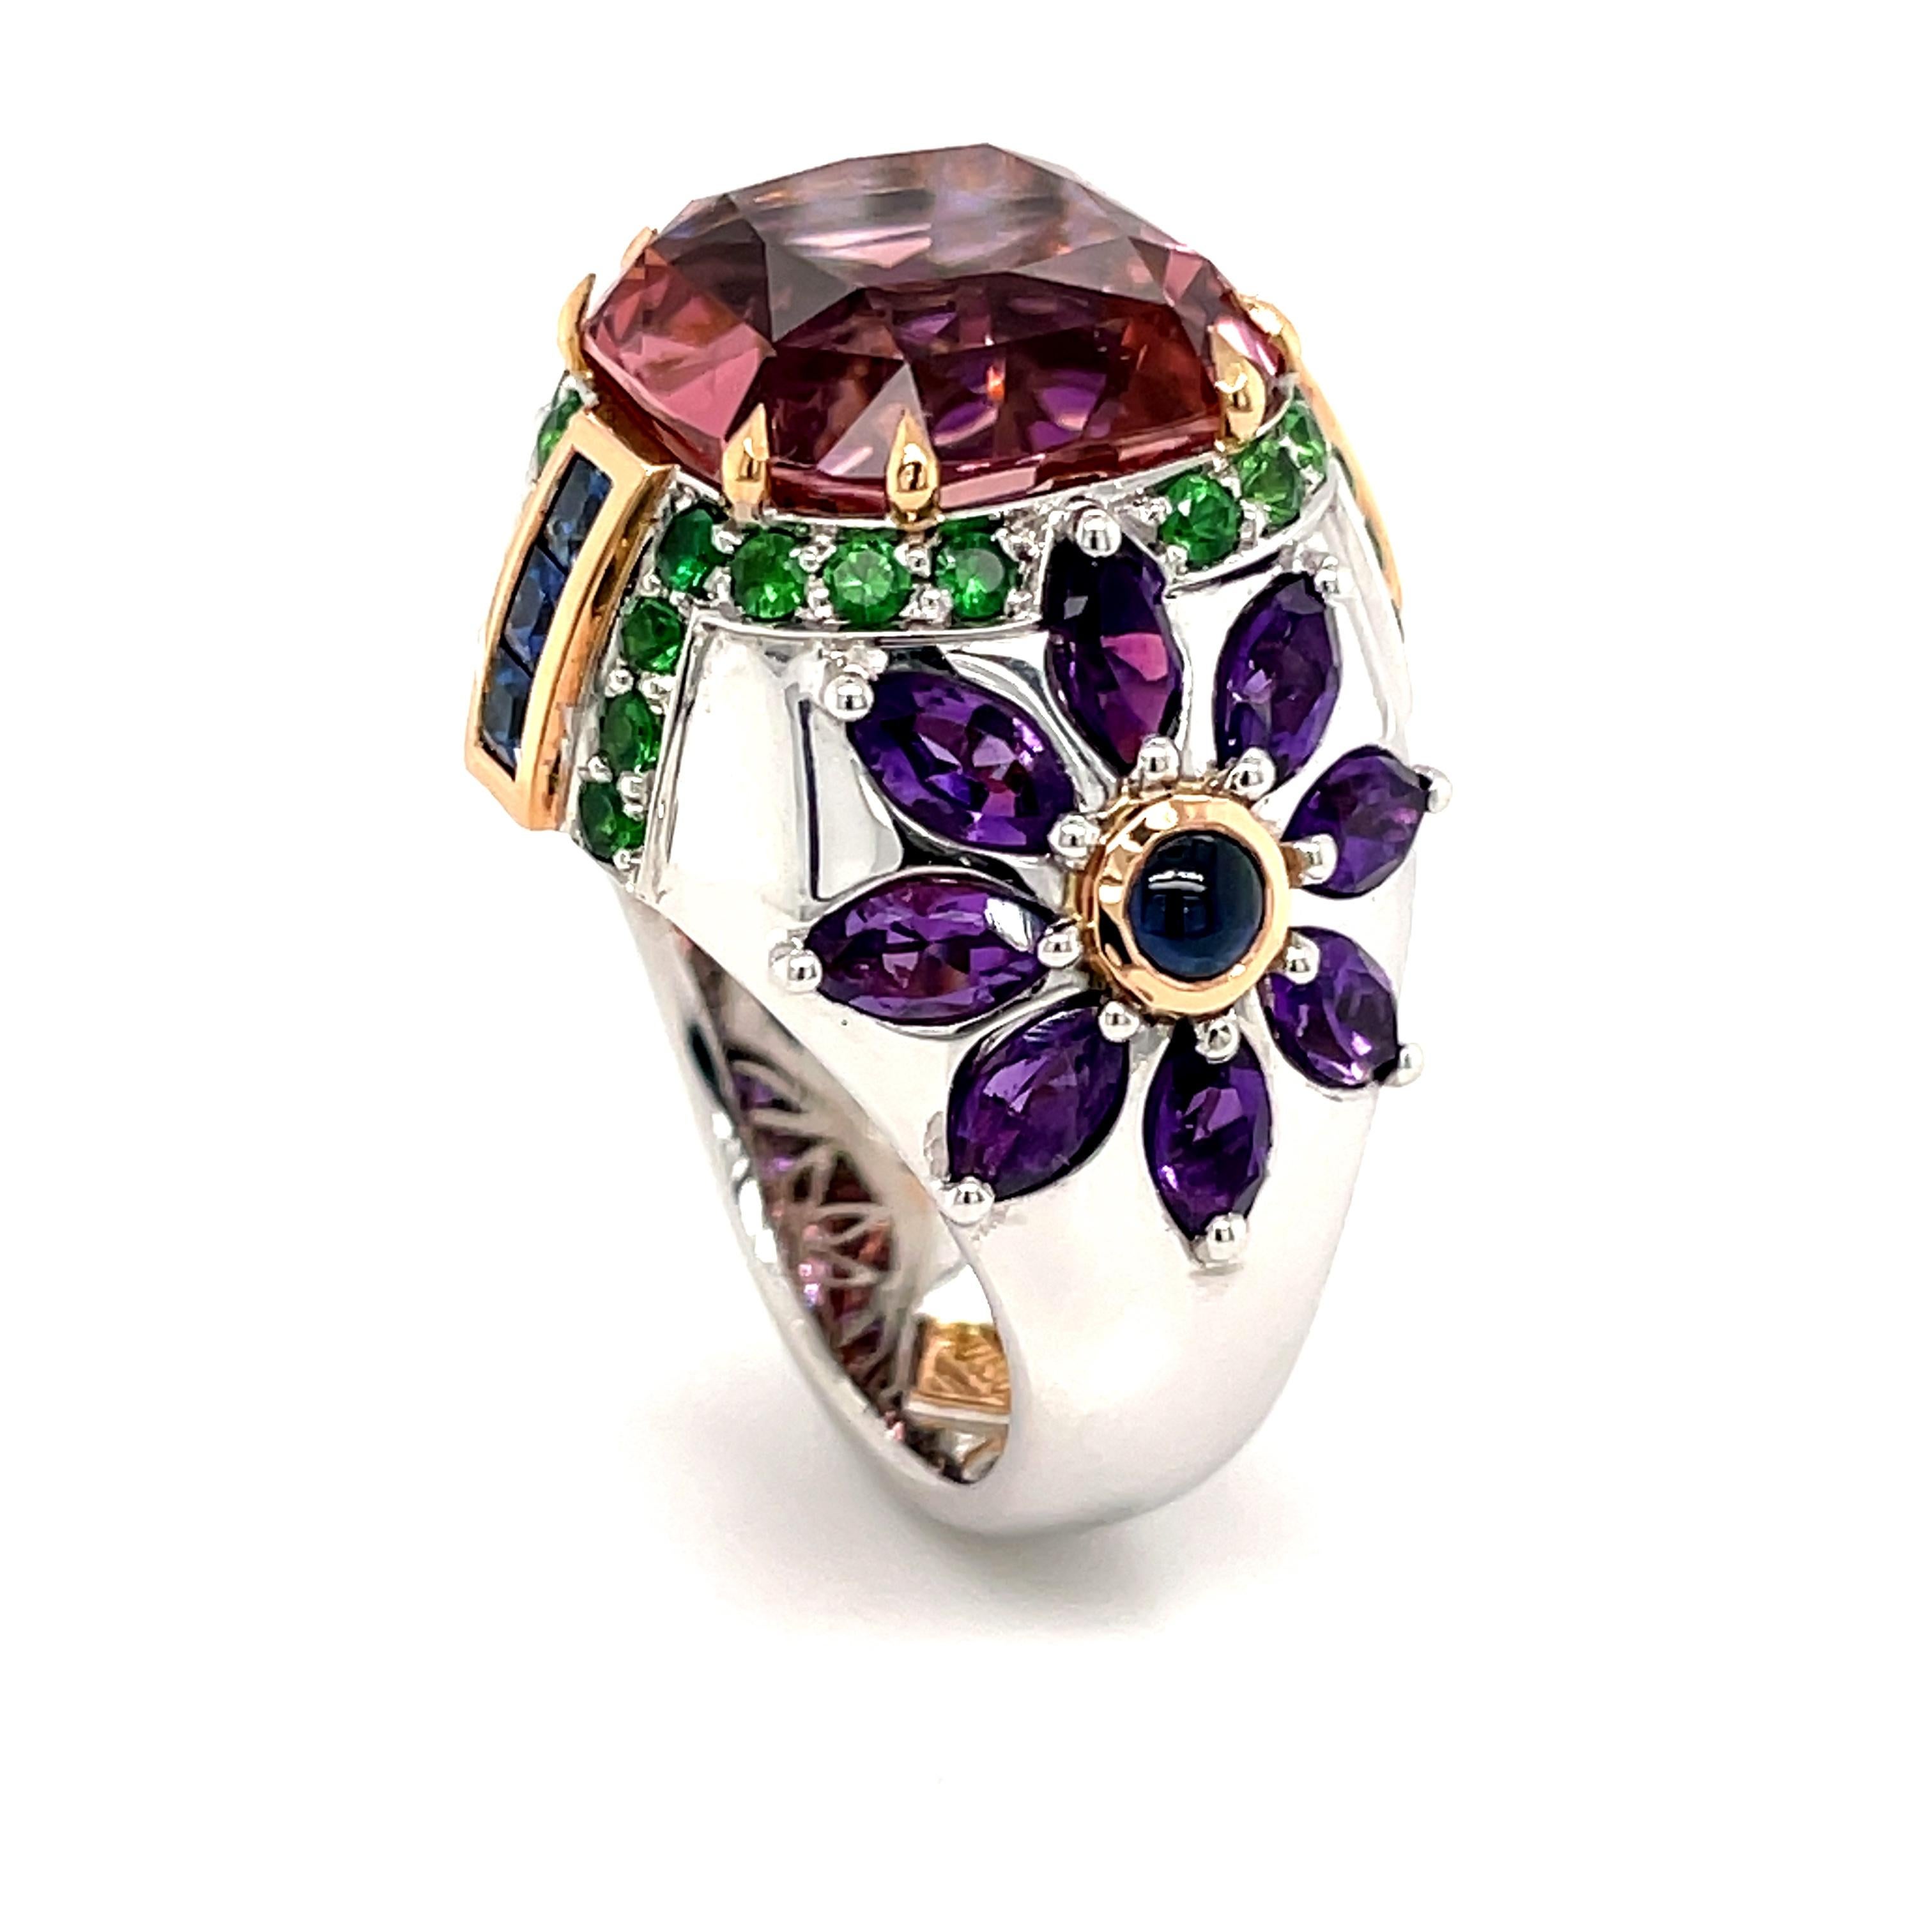 Cushion Cut 10.51ct Tourmaline Cocktail Ring with Garnets, Sapphires & Amethyst by Musson For Sale